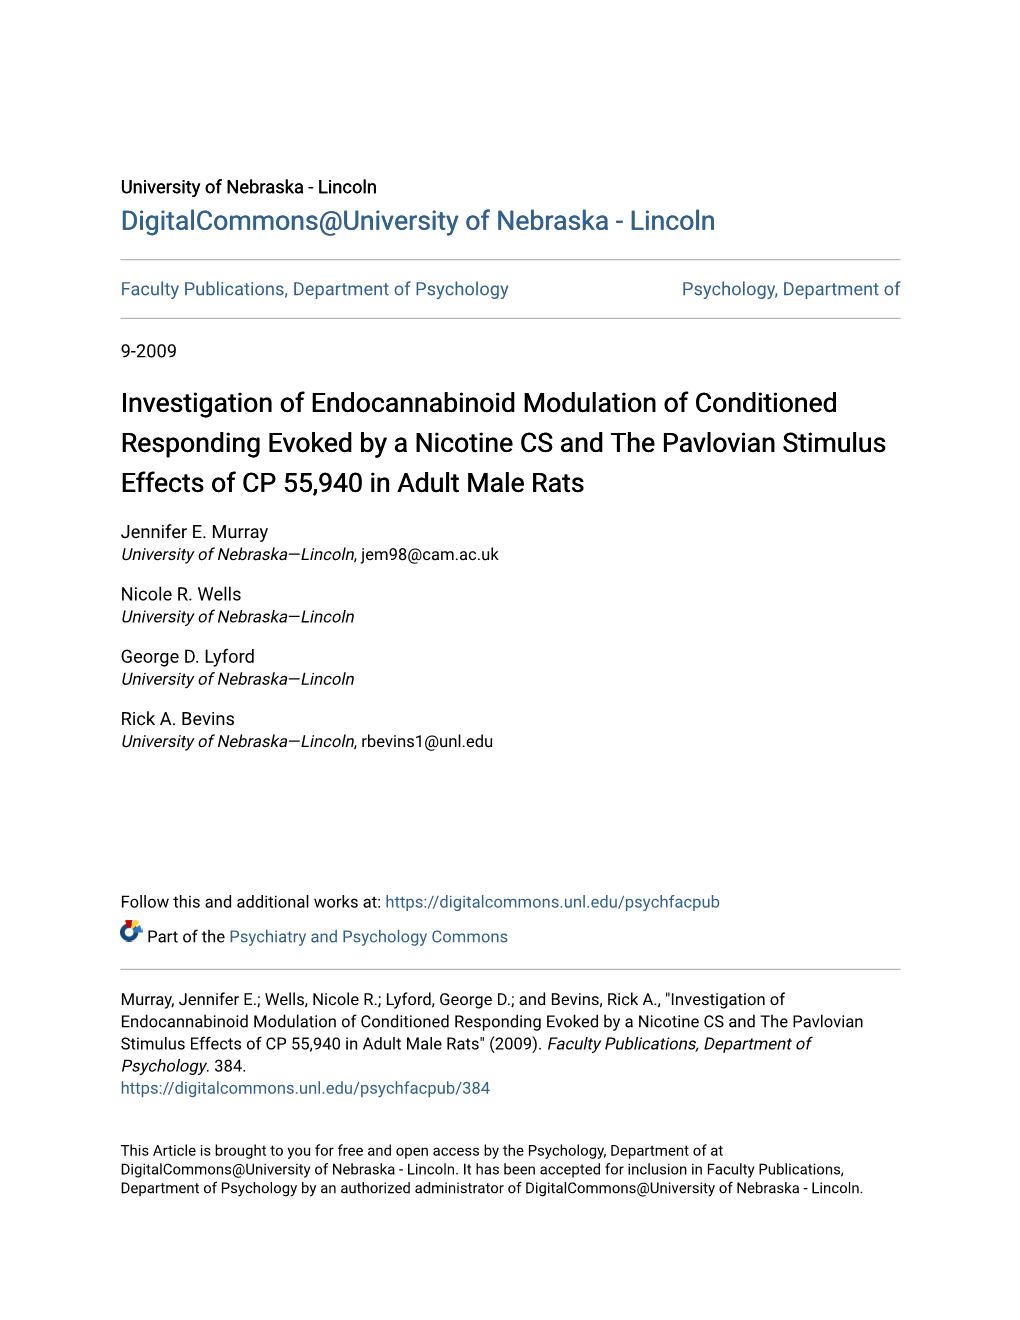 Investigation of Endocannabinoid Modulation of Conditioned Responding Evoked by a Nicotine CS and the Pavlovian Stimulus Effects of CP 55,940 in Adult Male Rats